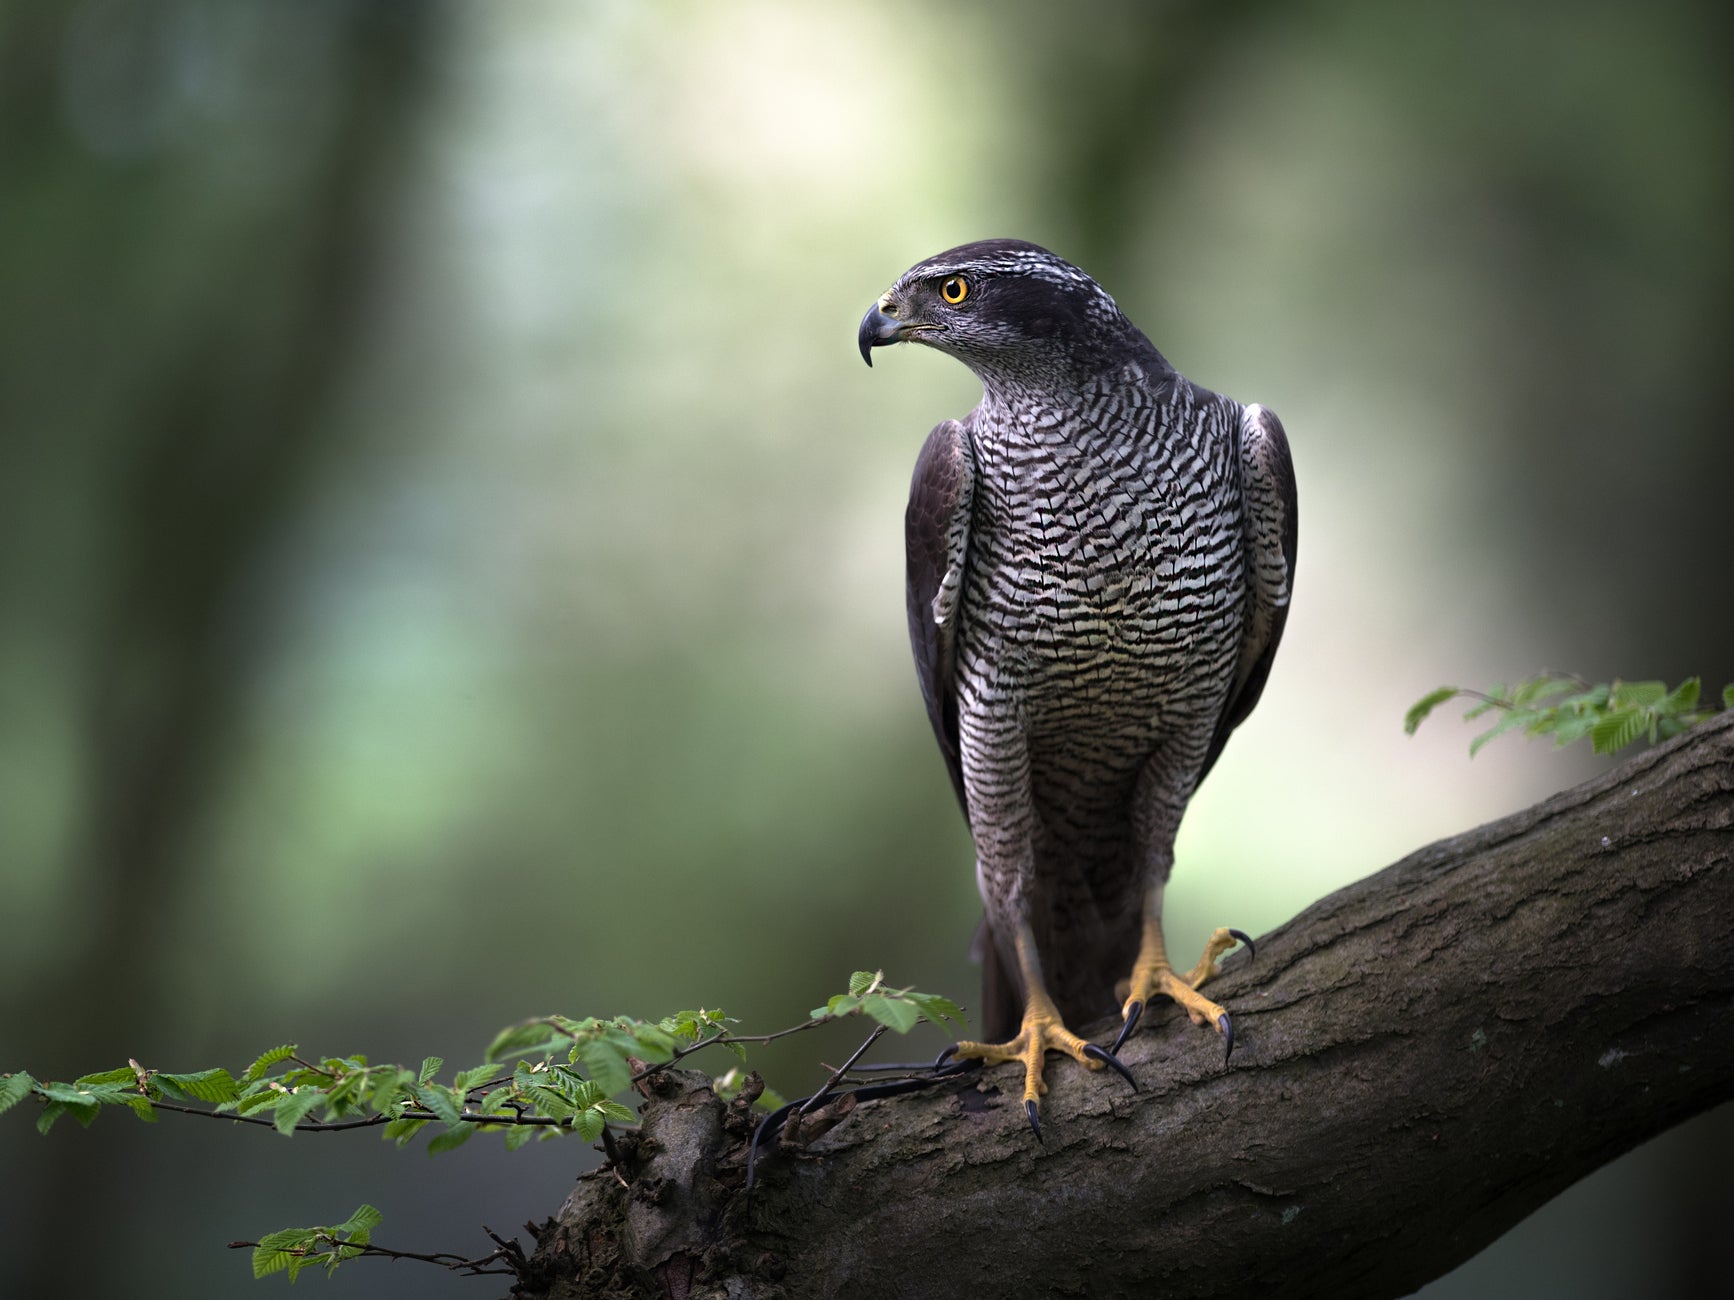 Three gamekeepers suspended over suspected killing of rare goshawk on Queen's land